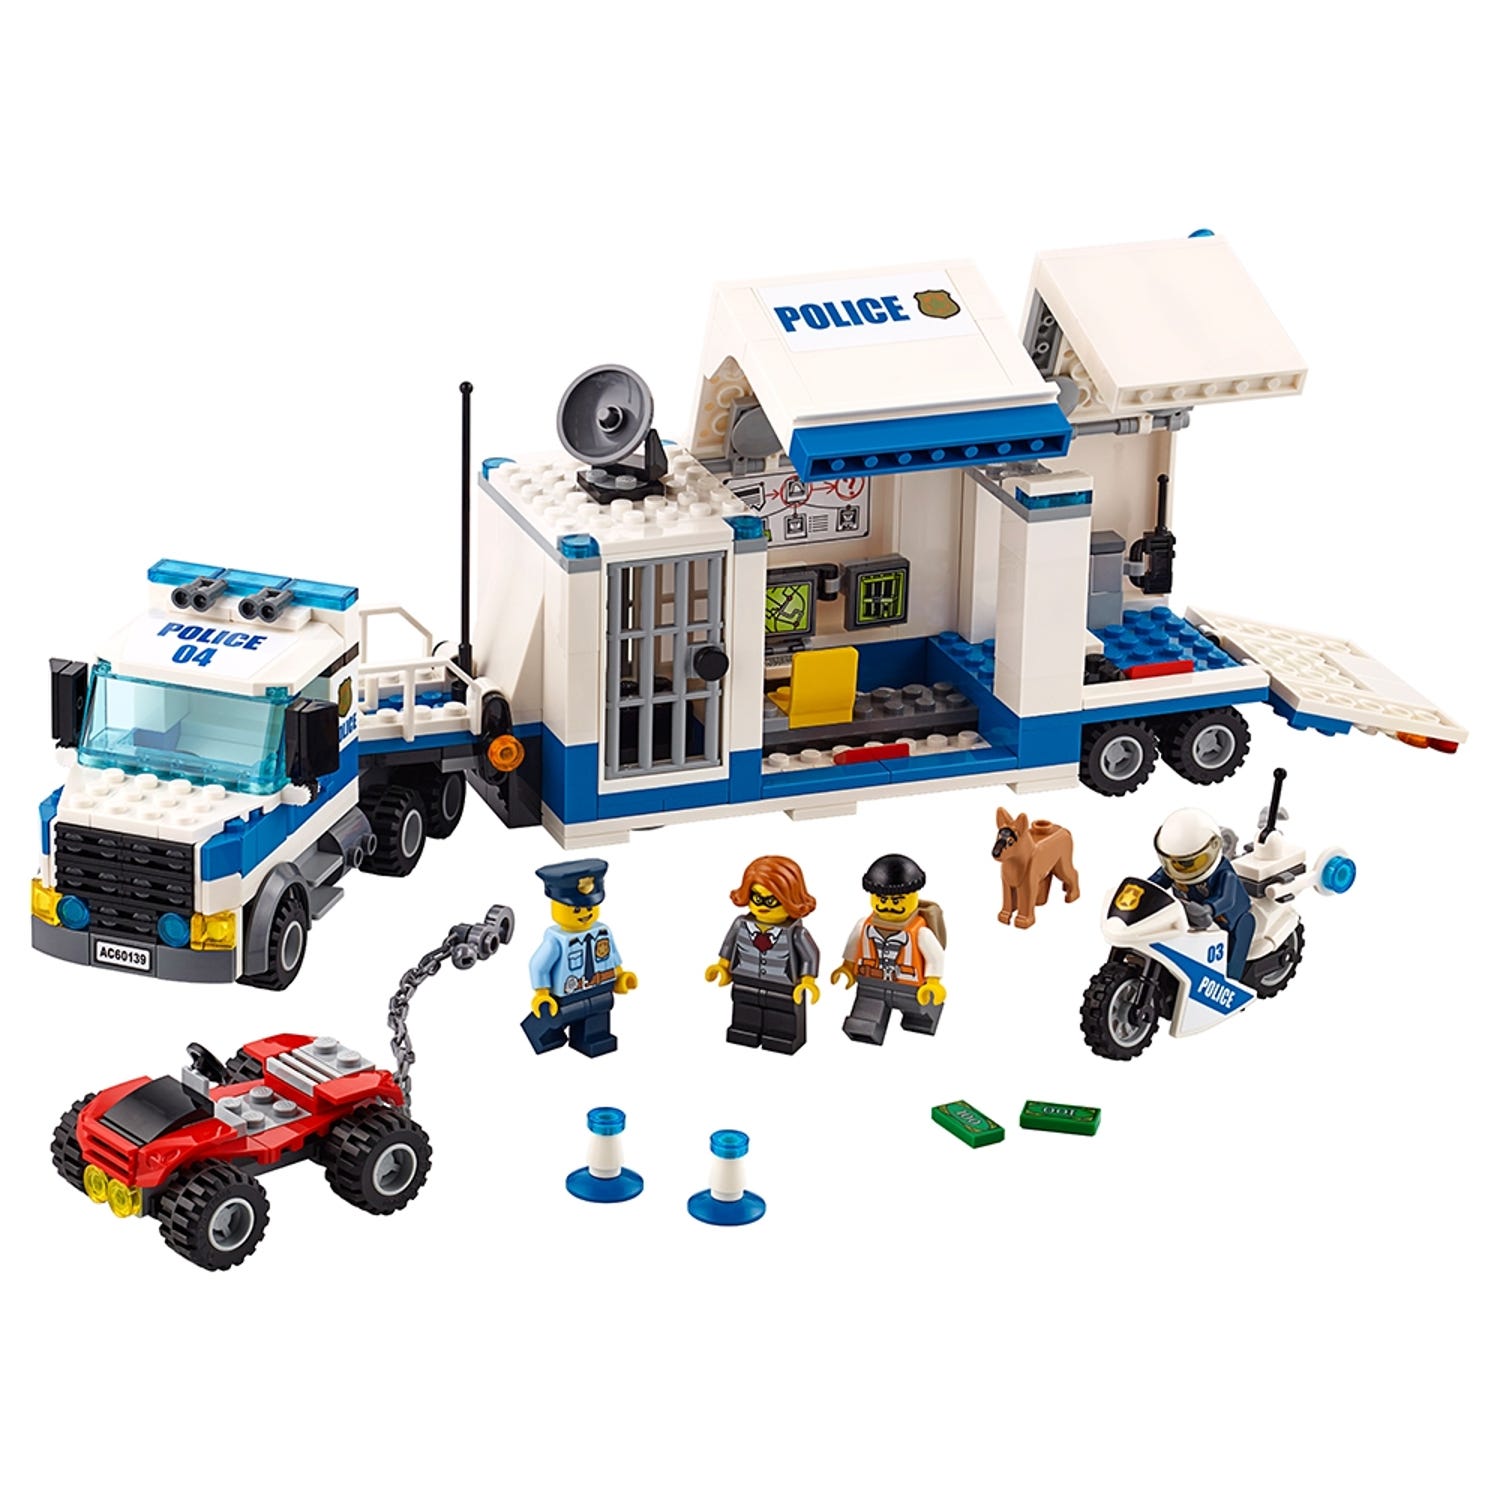 Mobile Command Center | City | Buy online at Official LEGO® Shop US